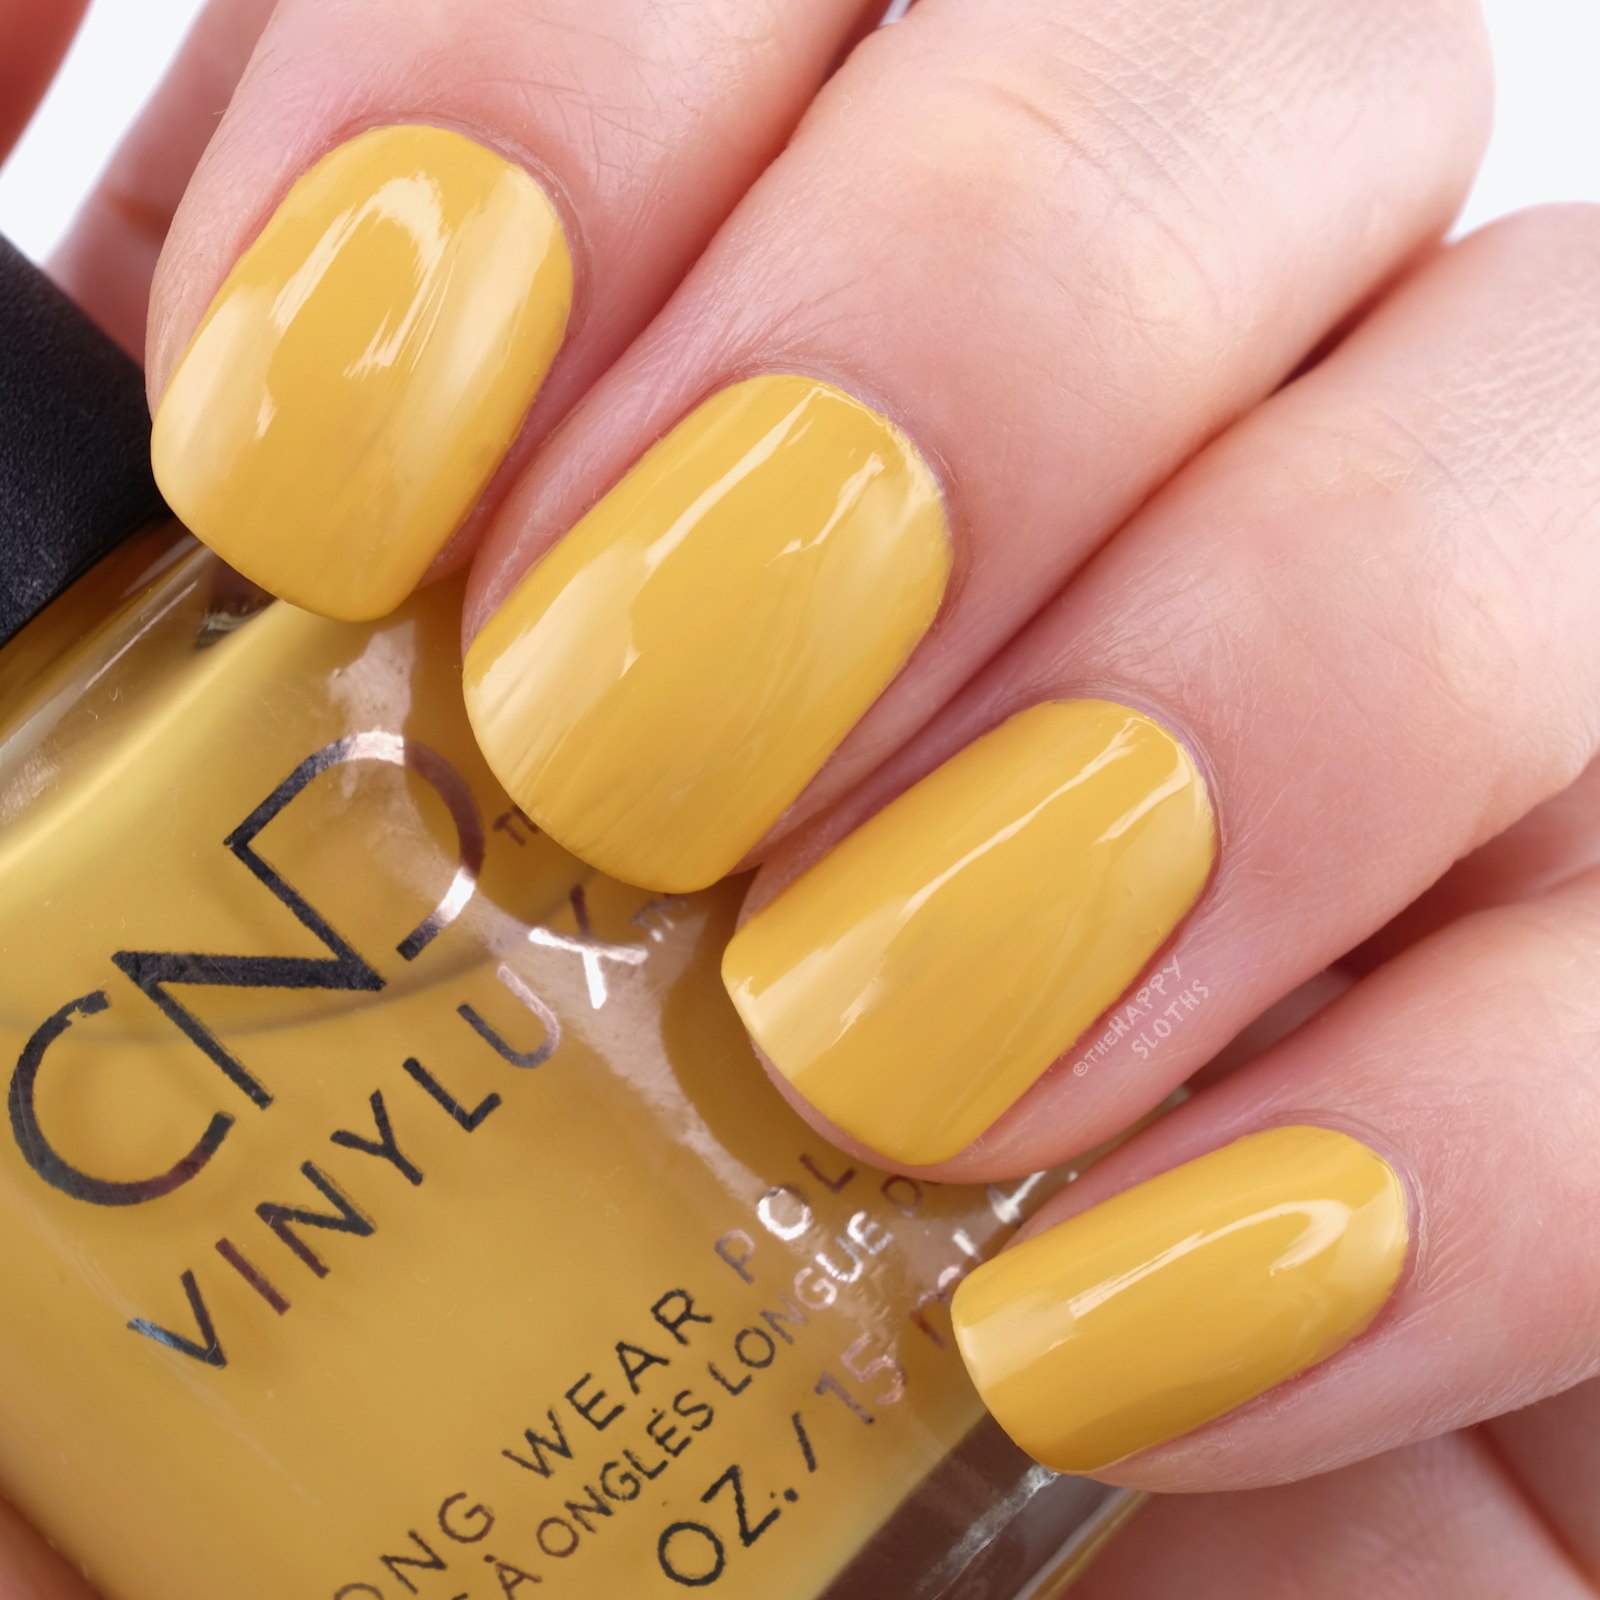 CND | Summer 2022 Mediterranean Dream Collection | Limoncello: Review and Swatches